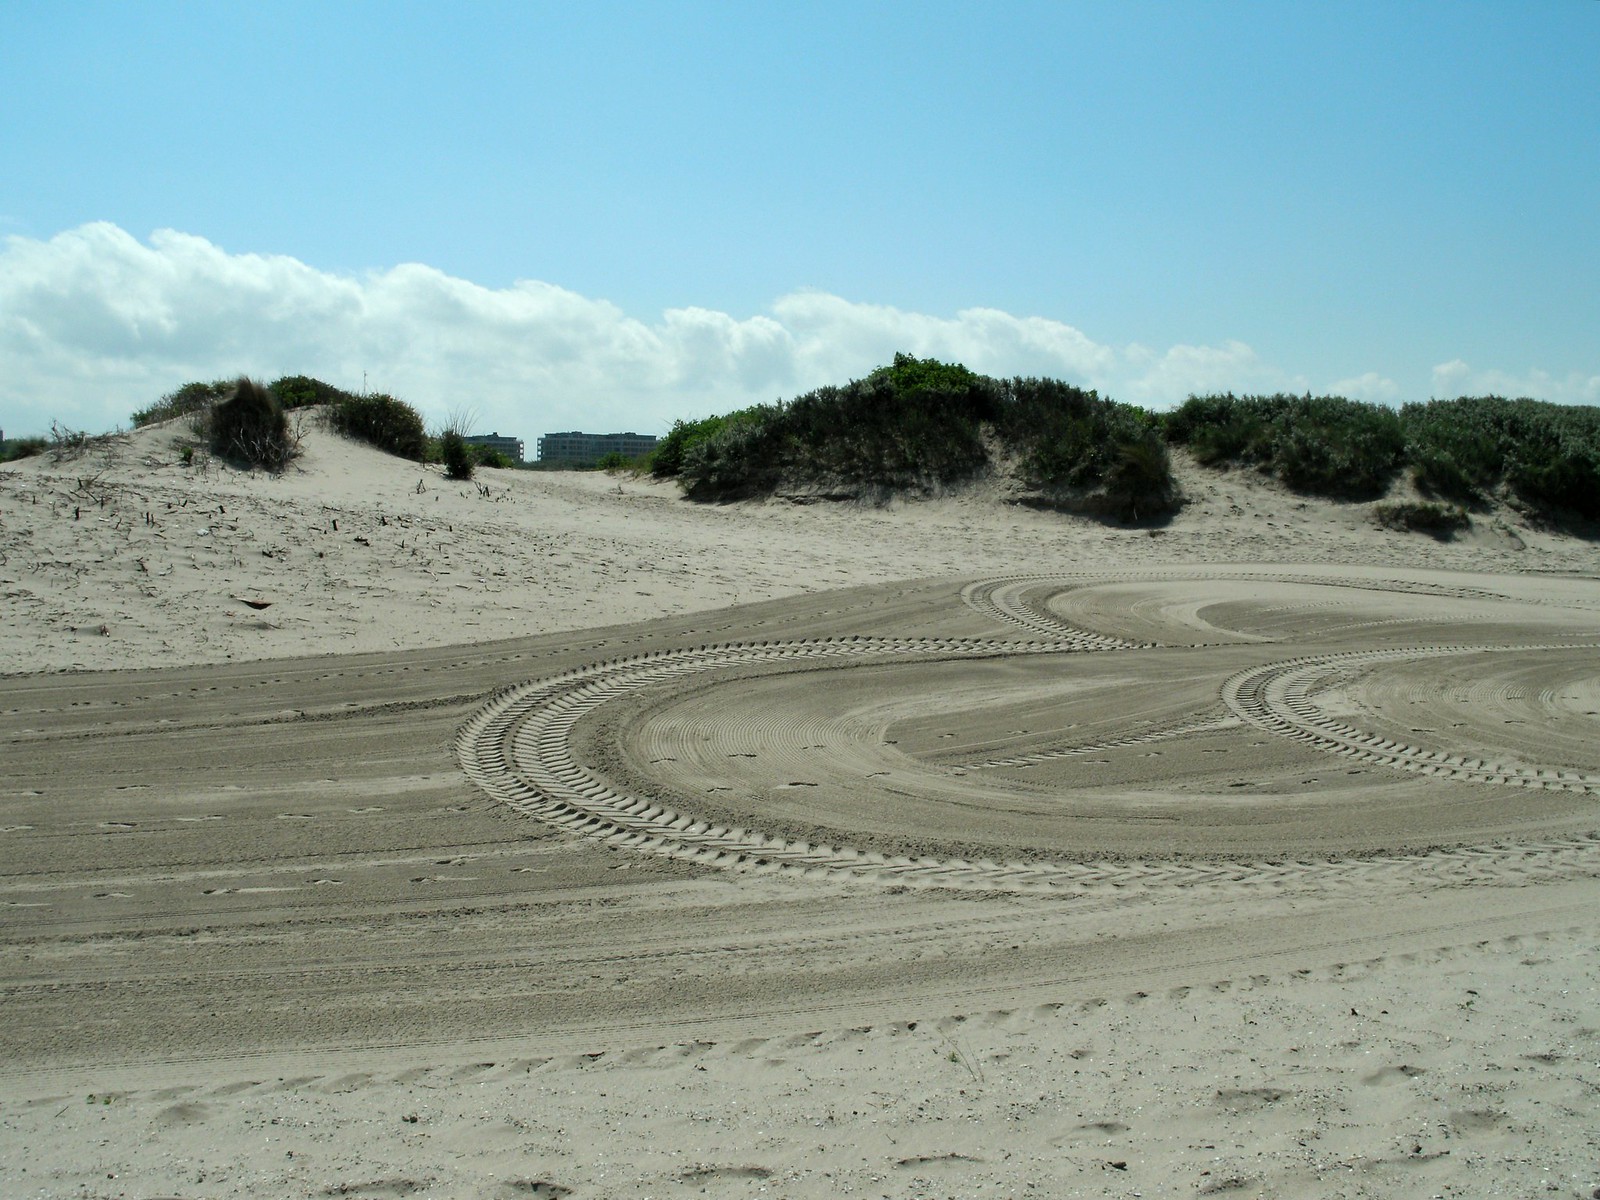 Marks in the sand show that vehicles have driven on the beach.